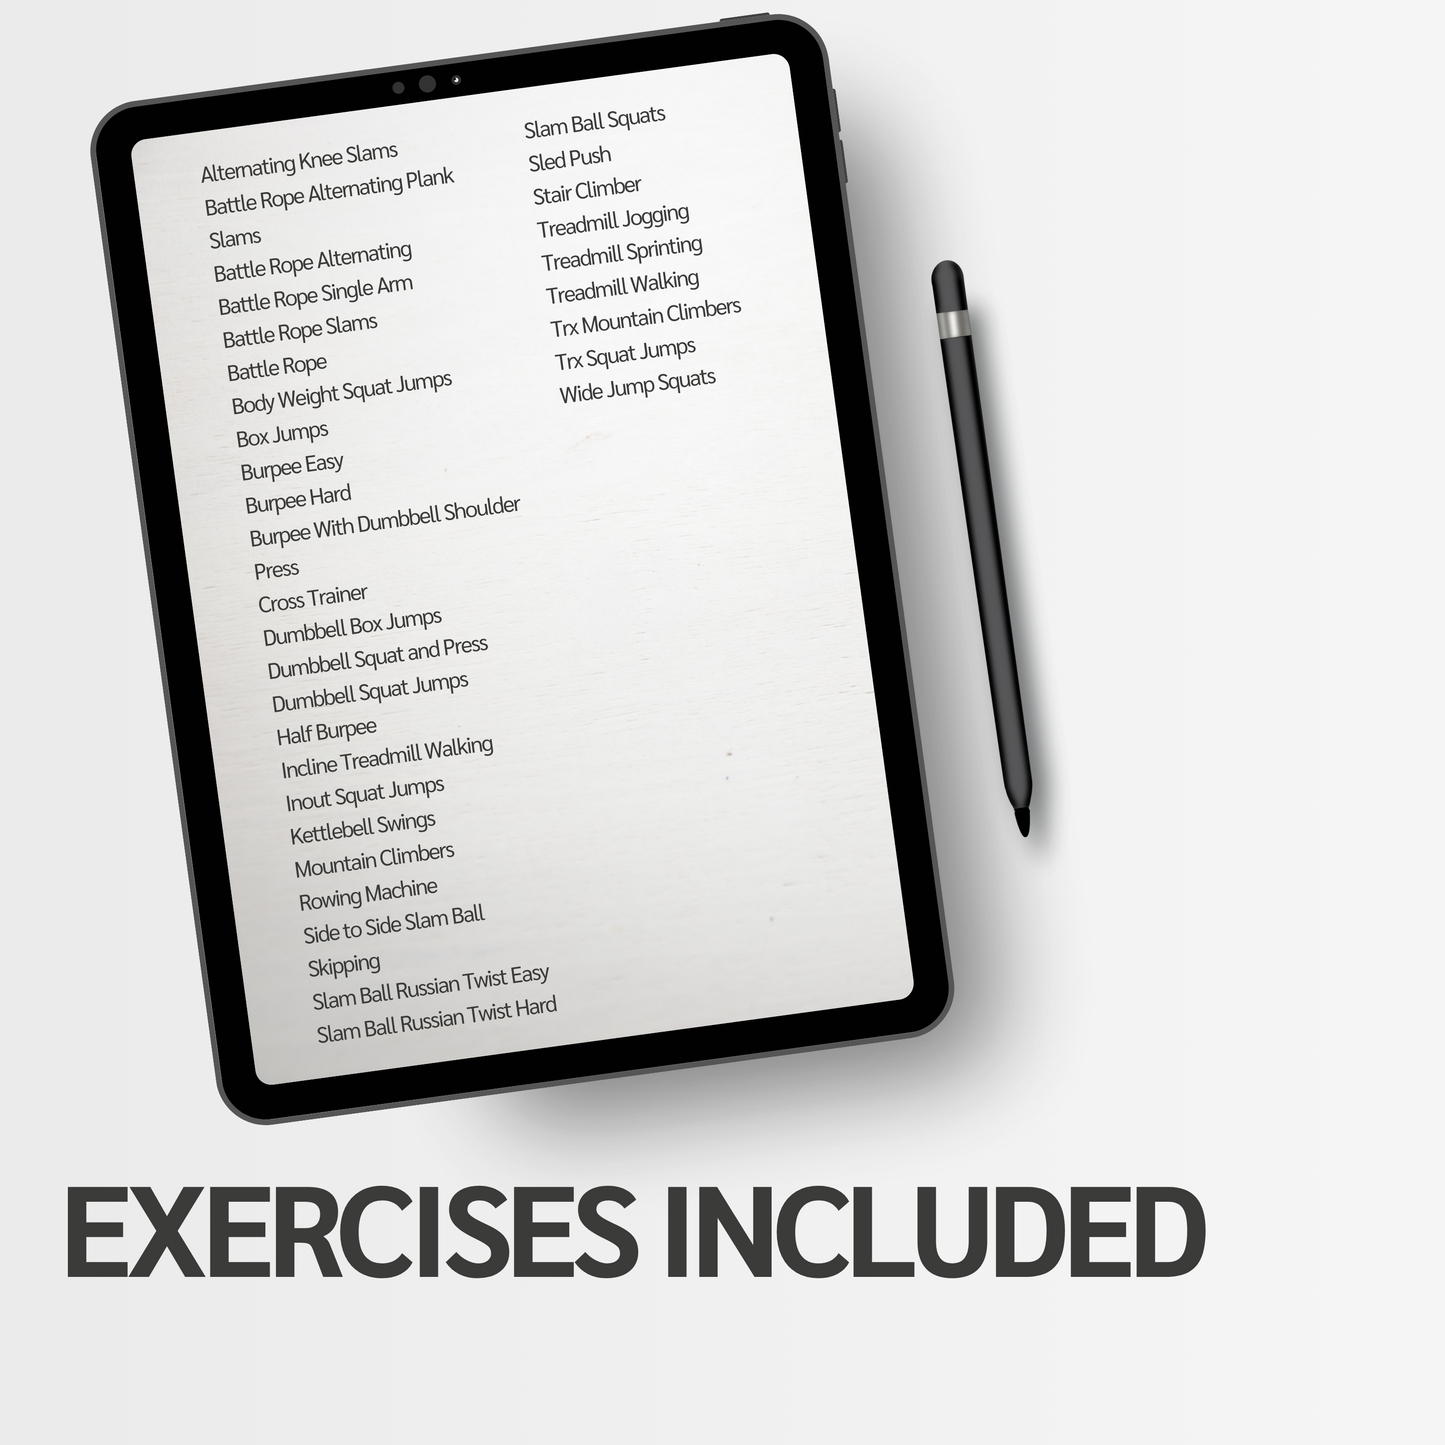 HIIT/Cardio Exercise Bundle with 34 Videos